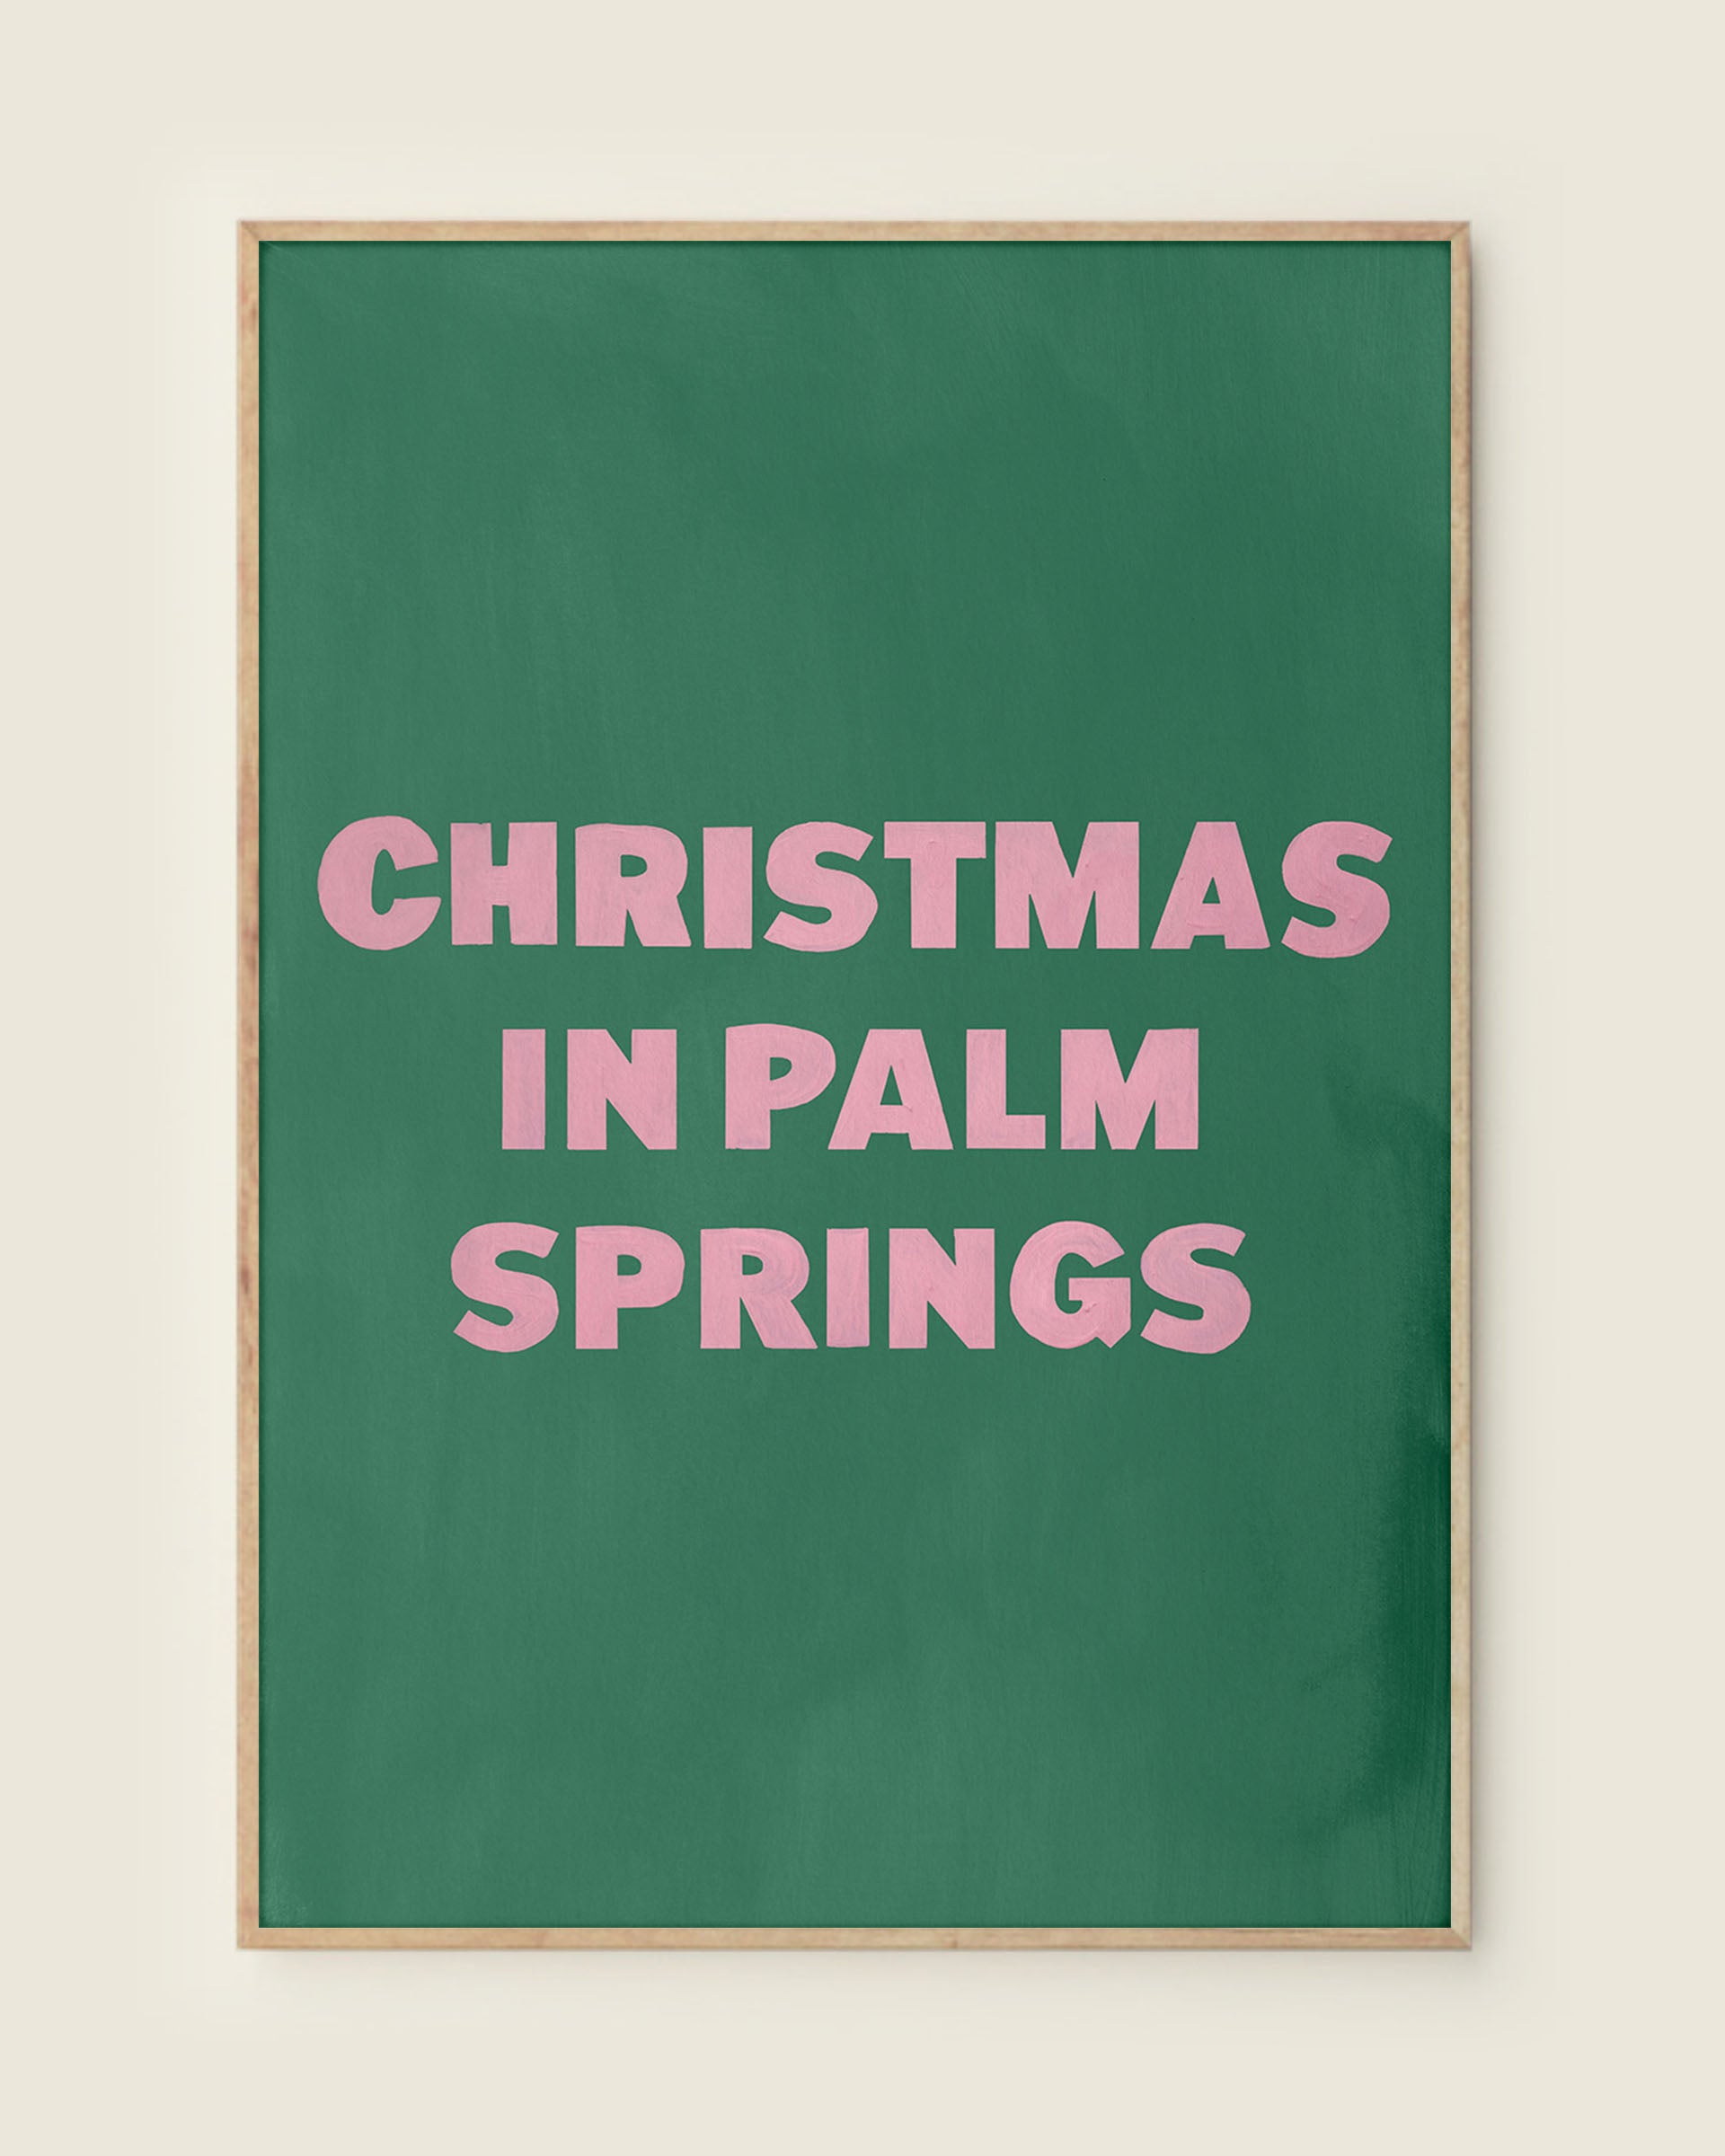 Christmas in Palm Springs